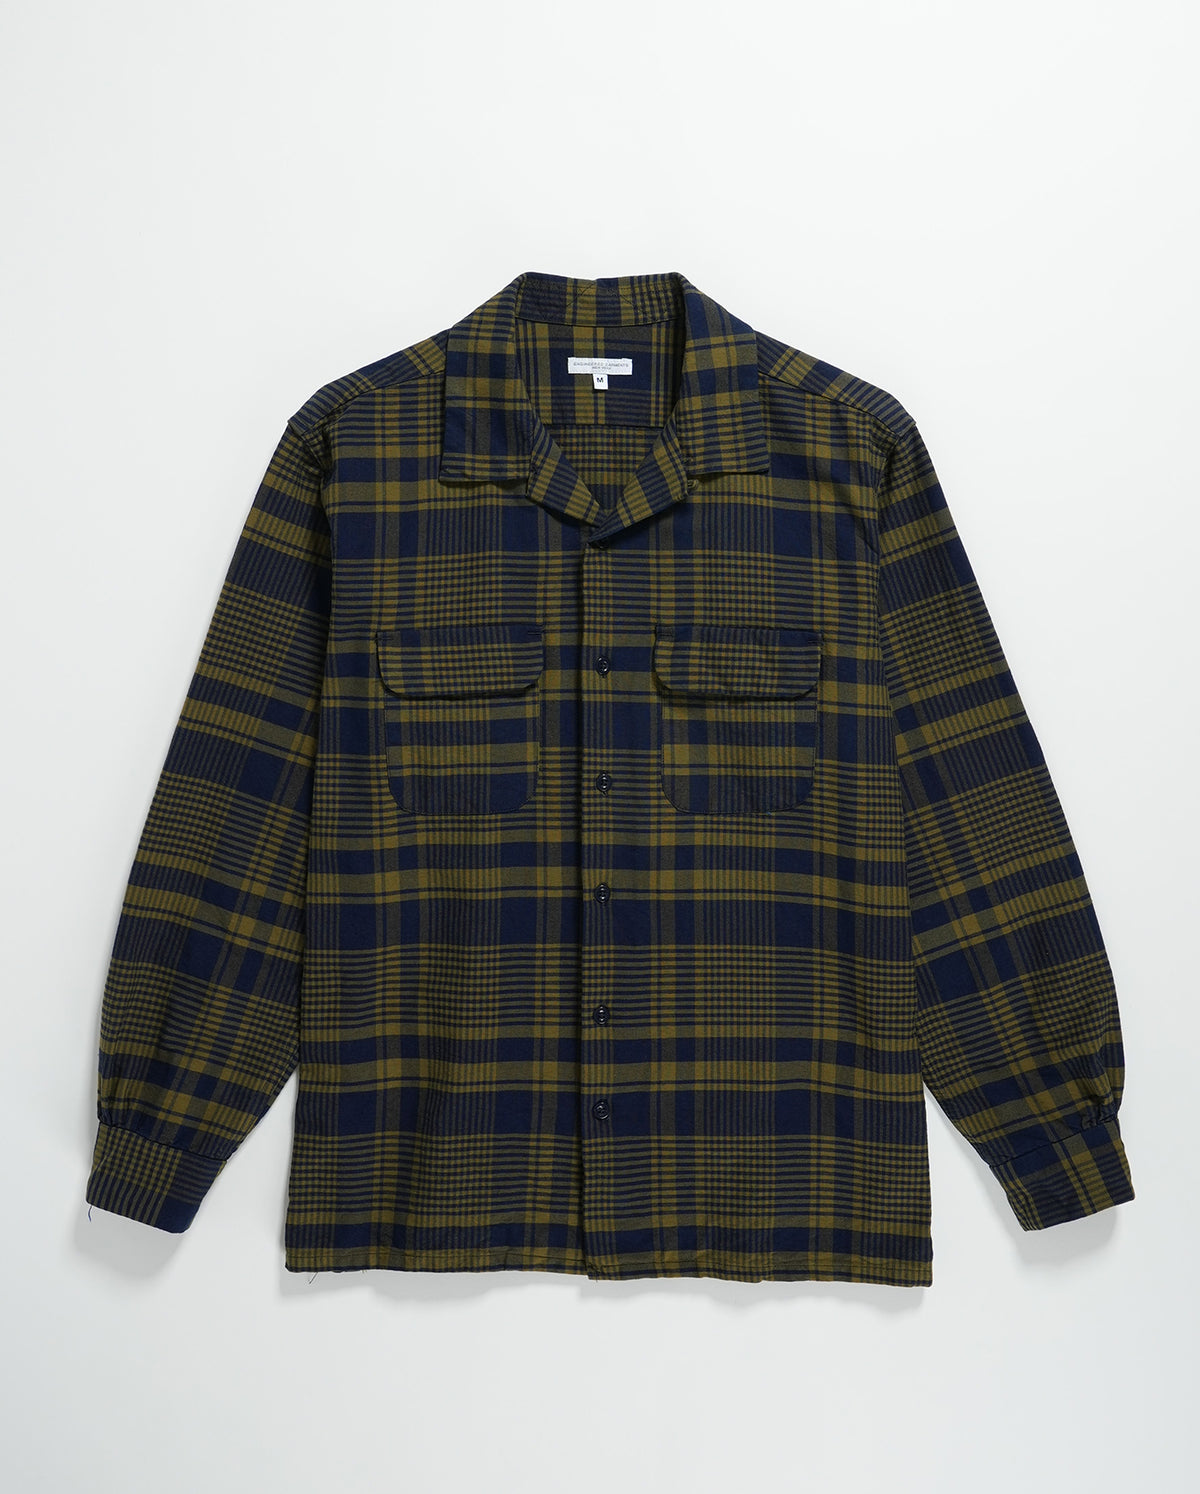 Classic Shirt In Navy Olive Plaid